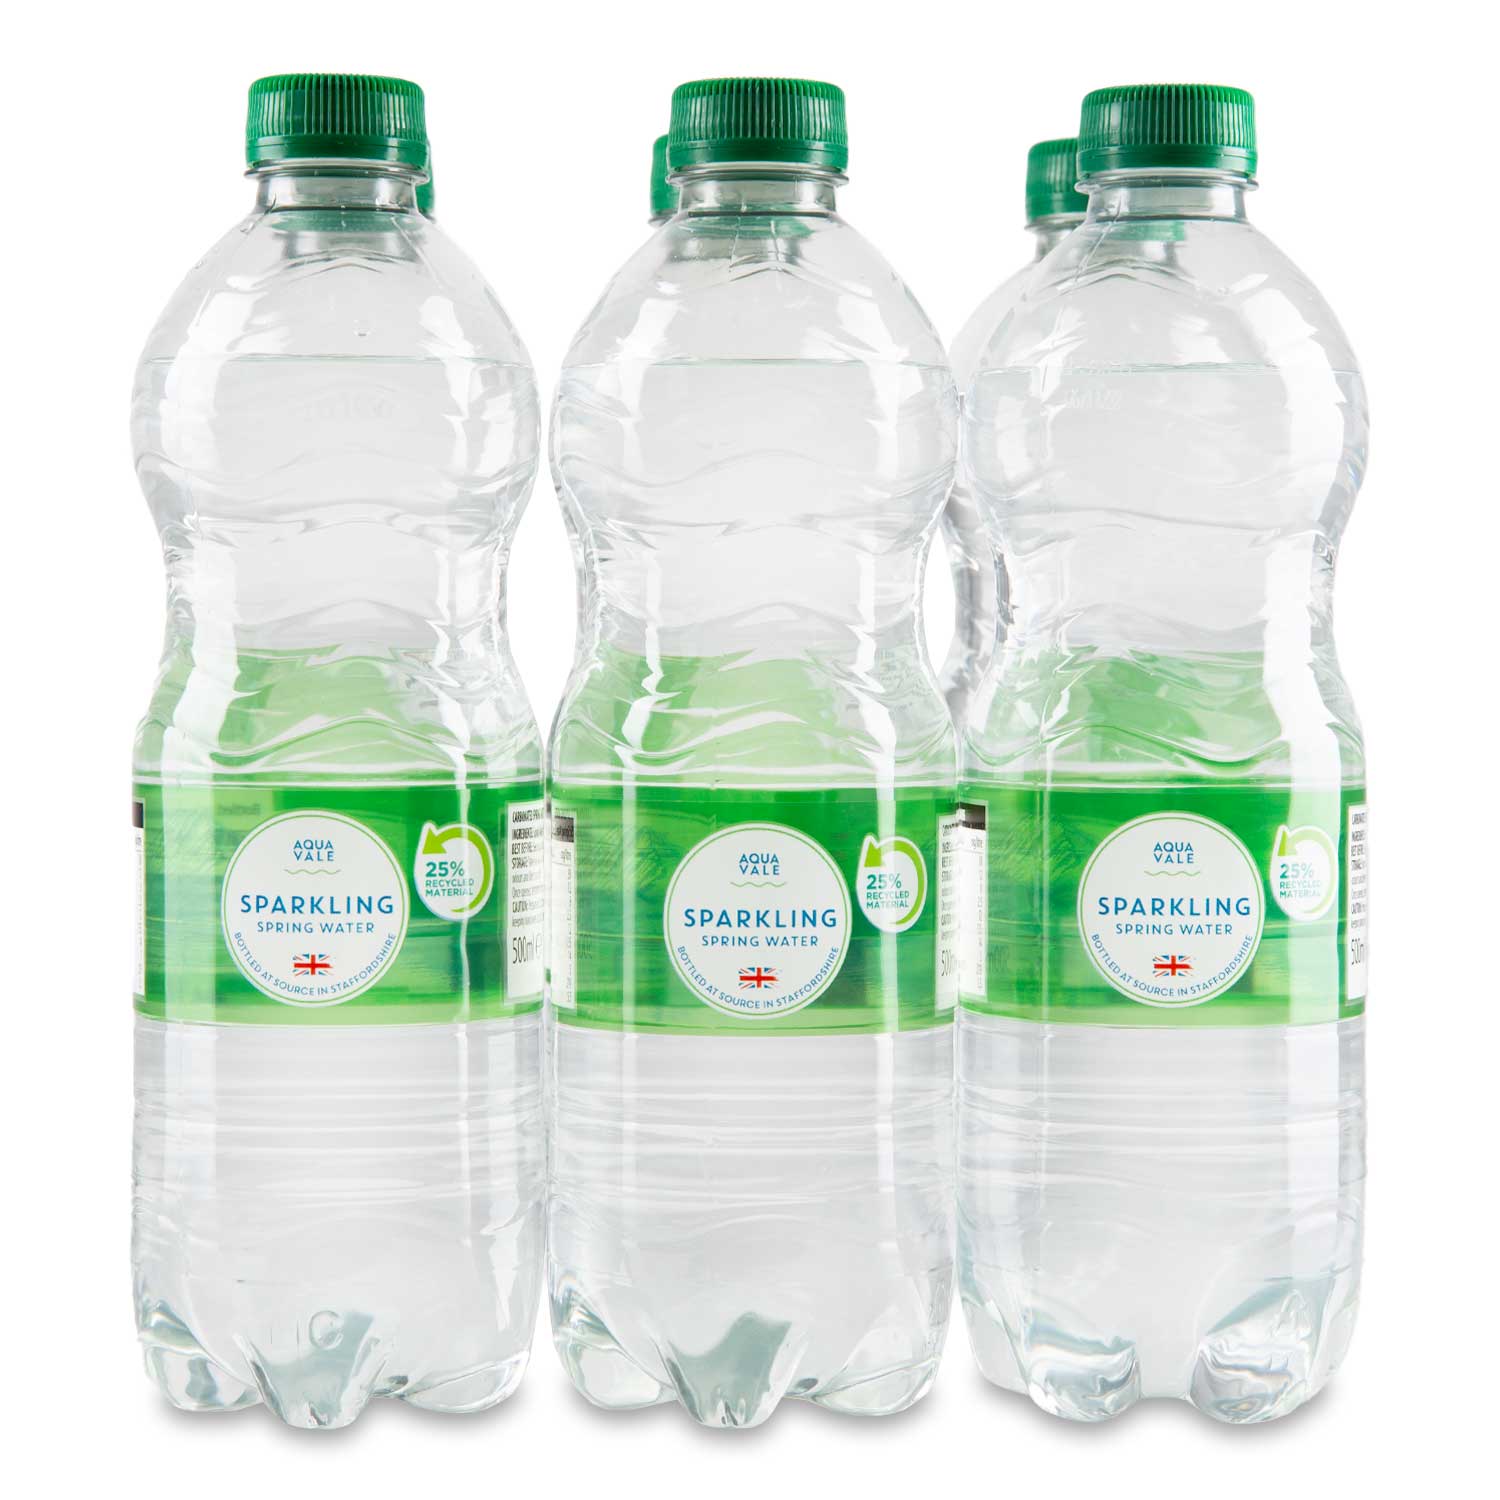 Aqua Vale Sparkling Spring Water 6x500ml/6 Pack